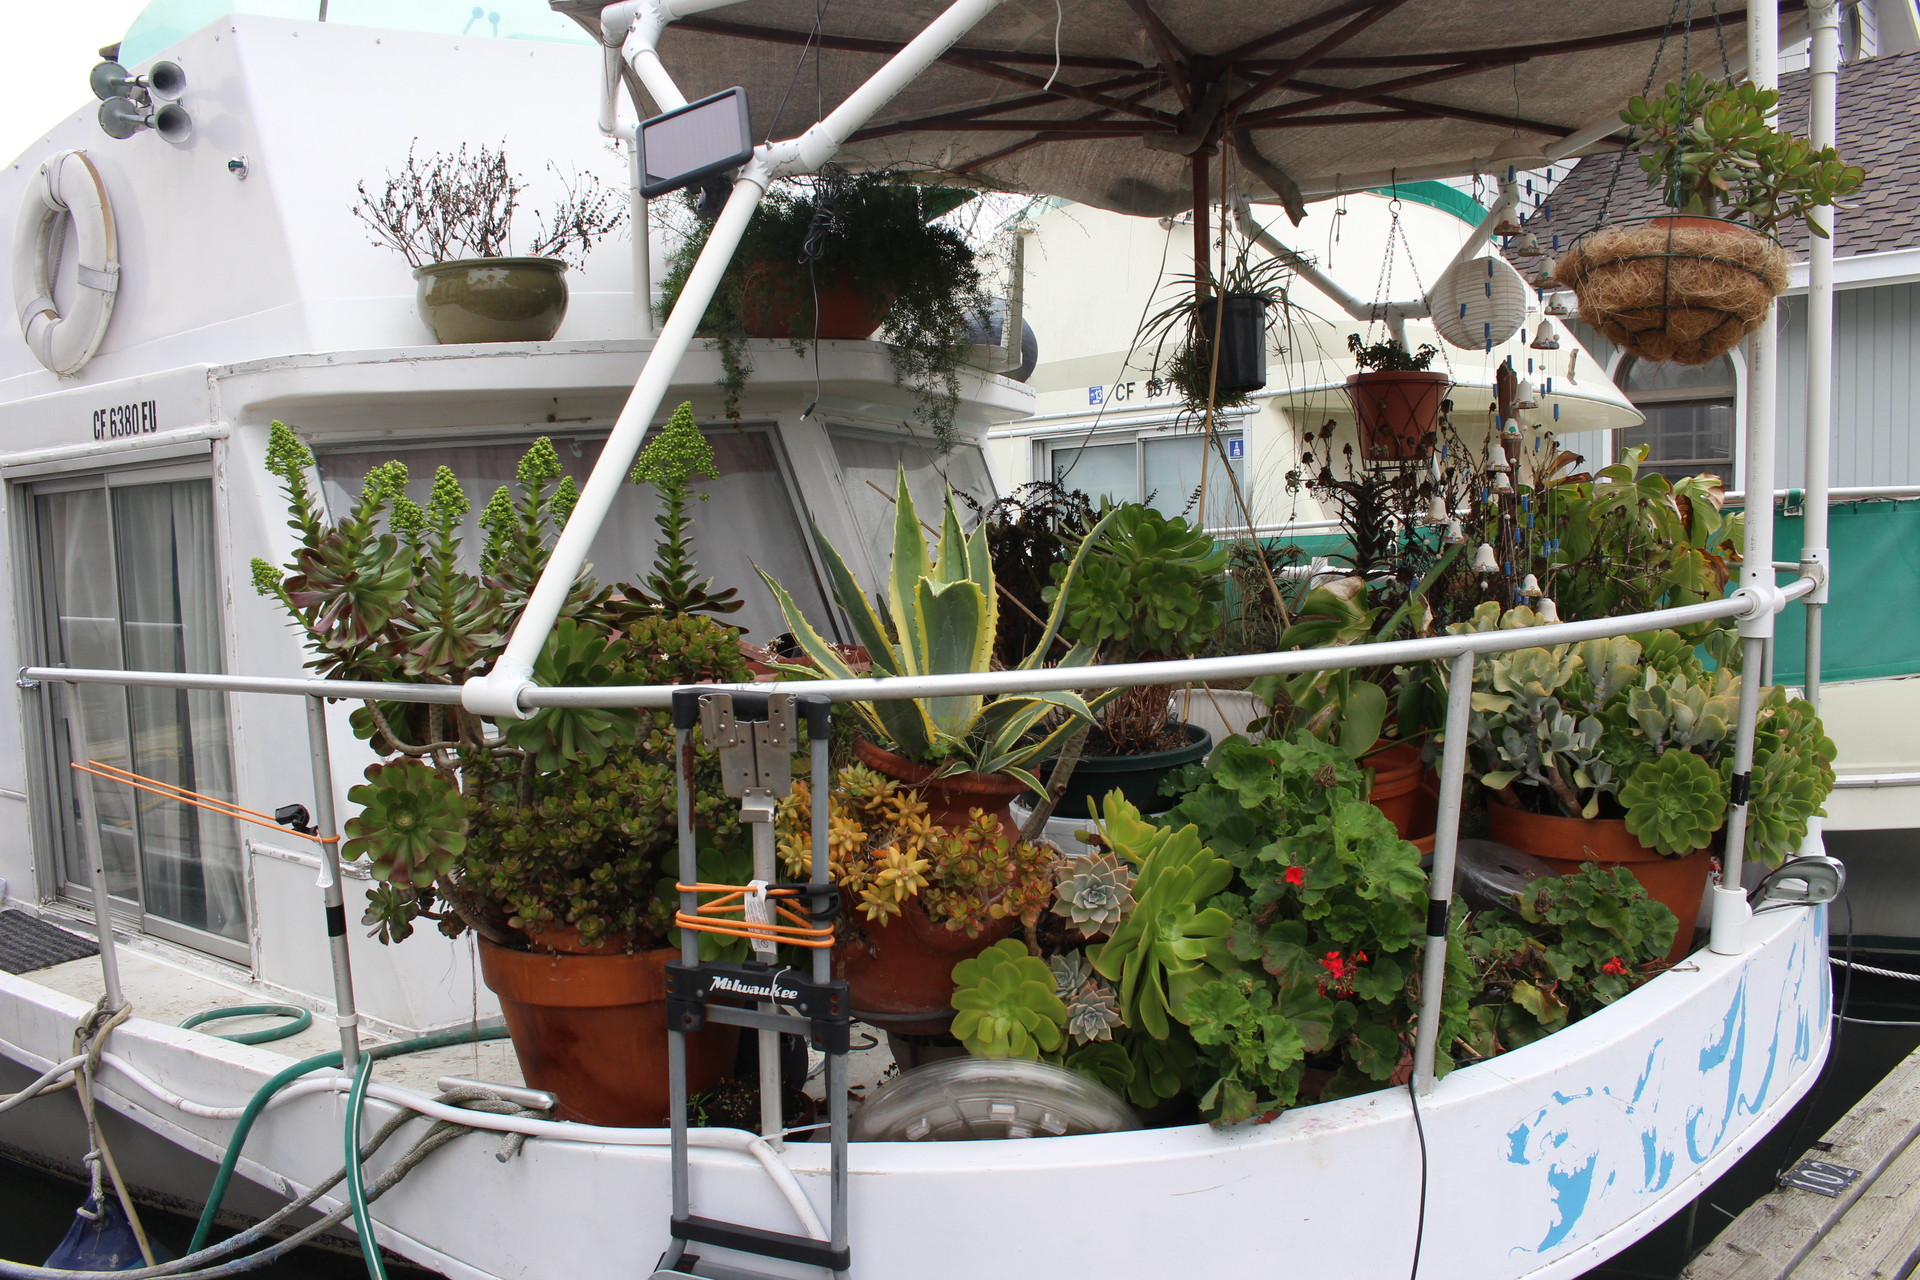 Lush gardens grow from pots at liveaboards in Docktown. The community is fighting for survival.